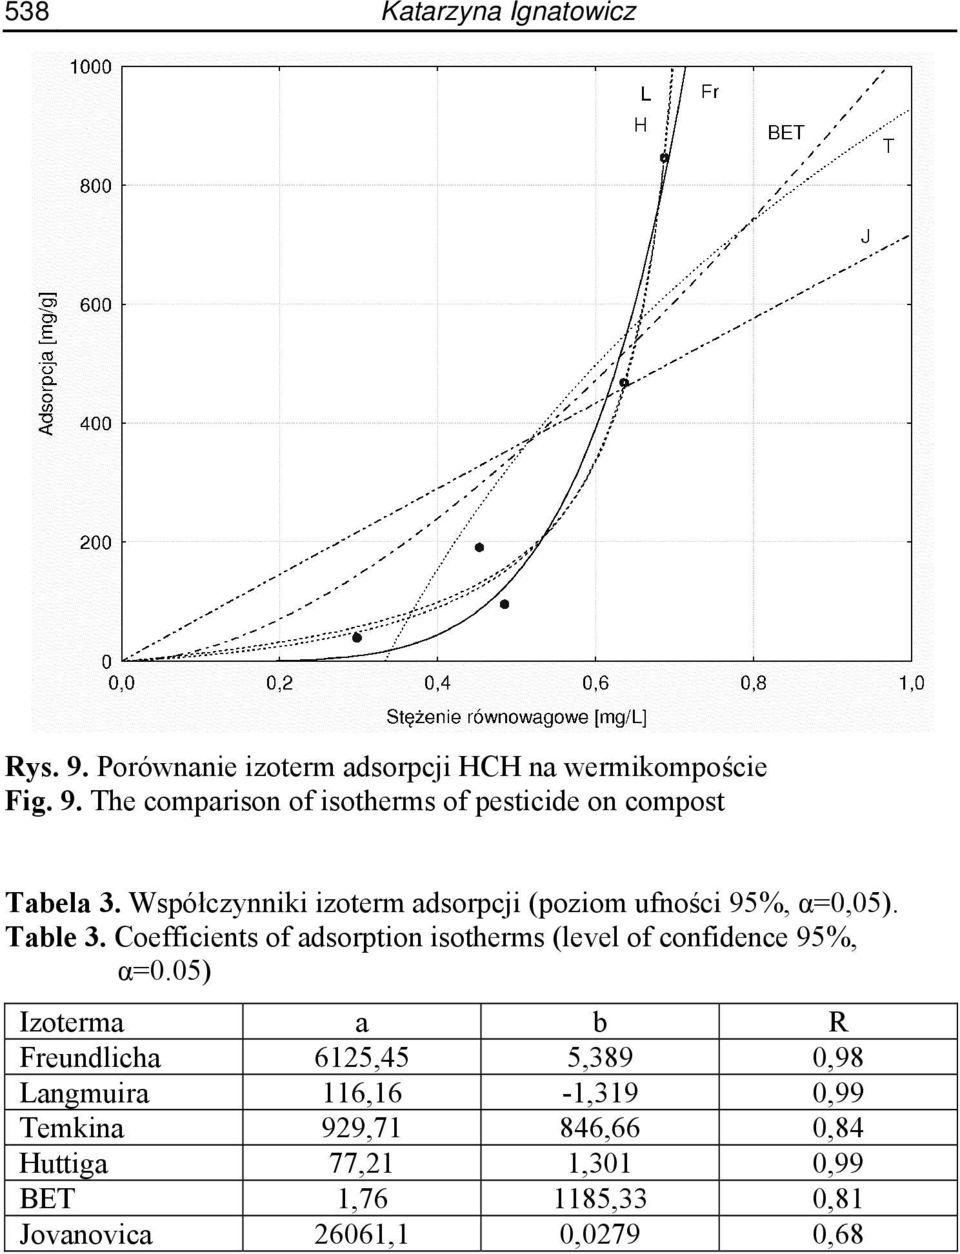 Coefficients of adsorption isotherms (level of confidence 95%, α=0.